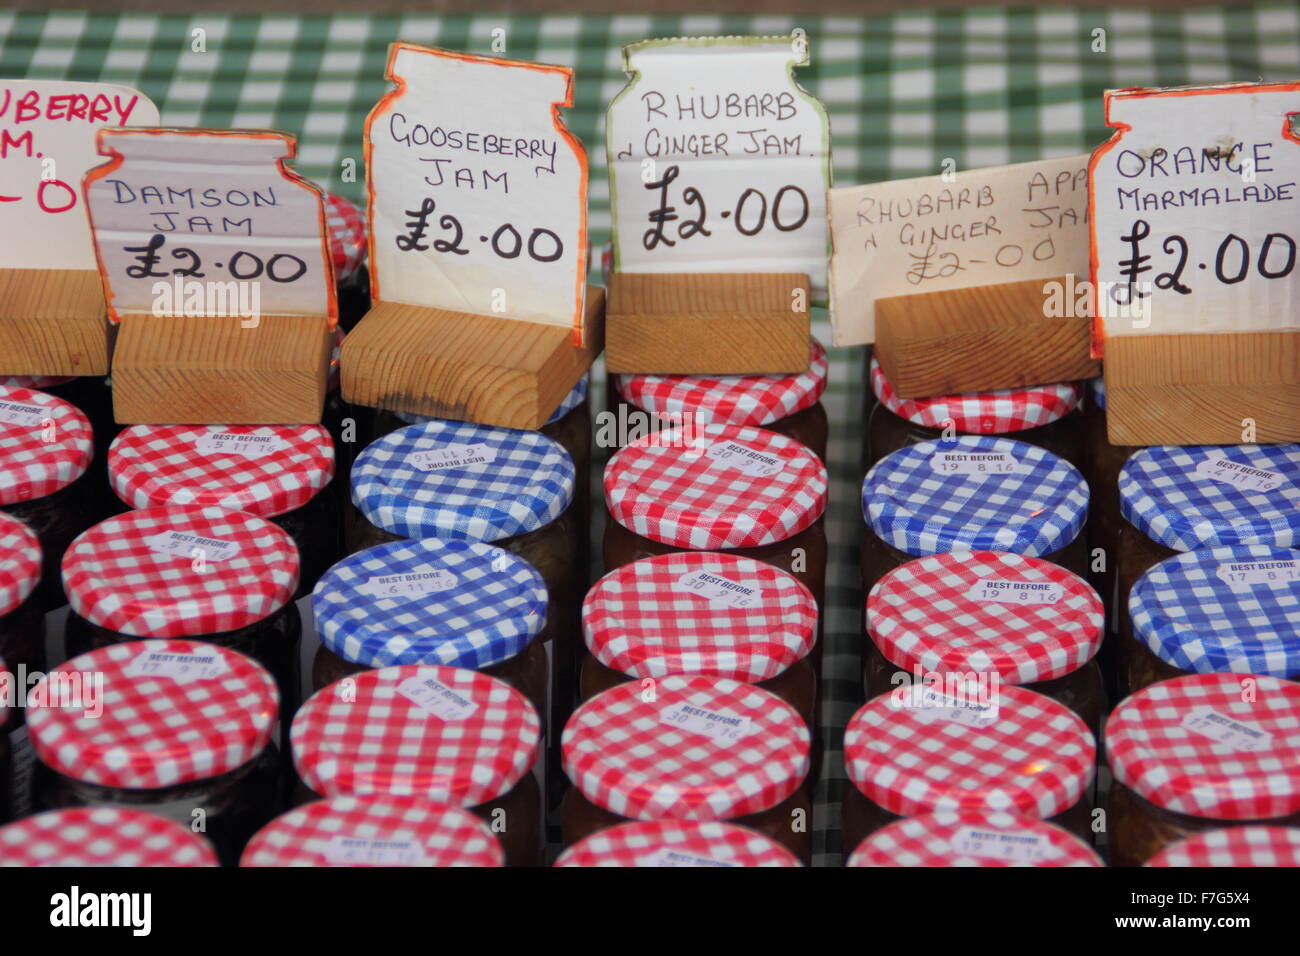 A selection of preserves for sale on a stall at a farmers' market in Derbyshire, England UK Stock Photo